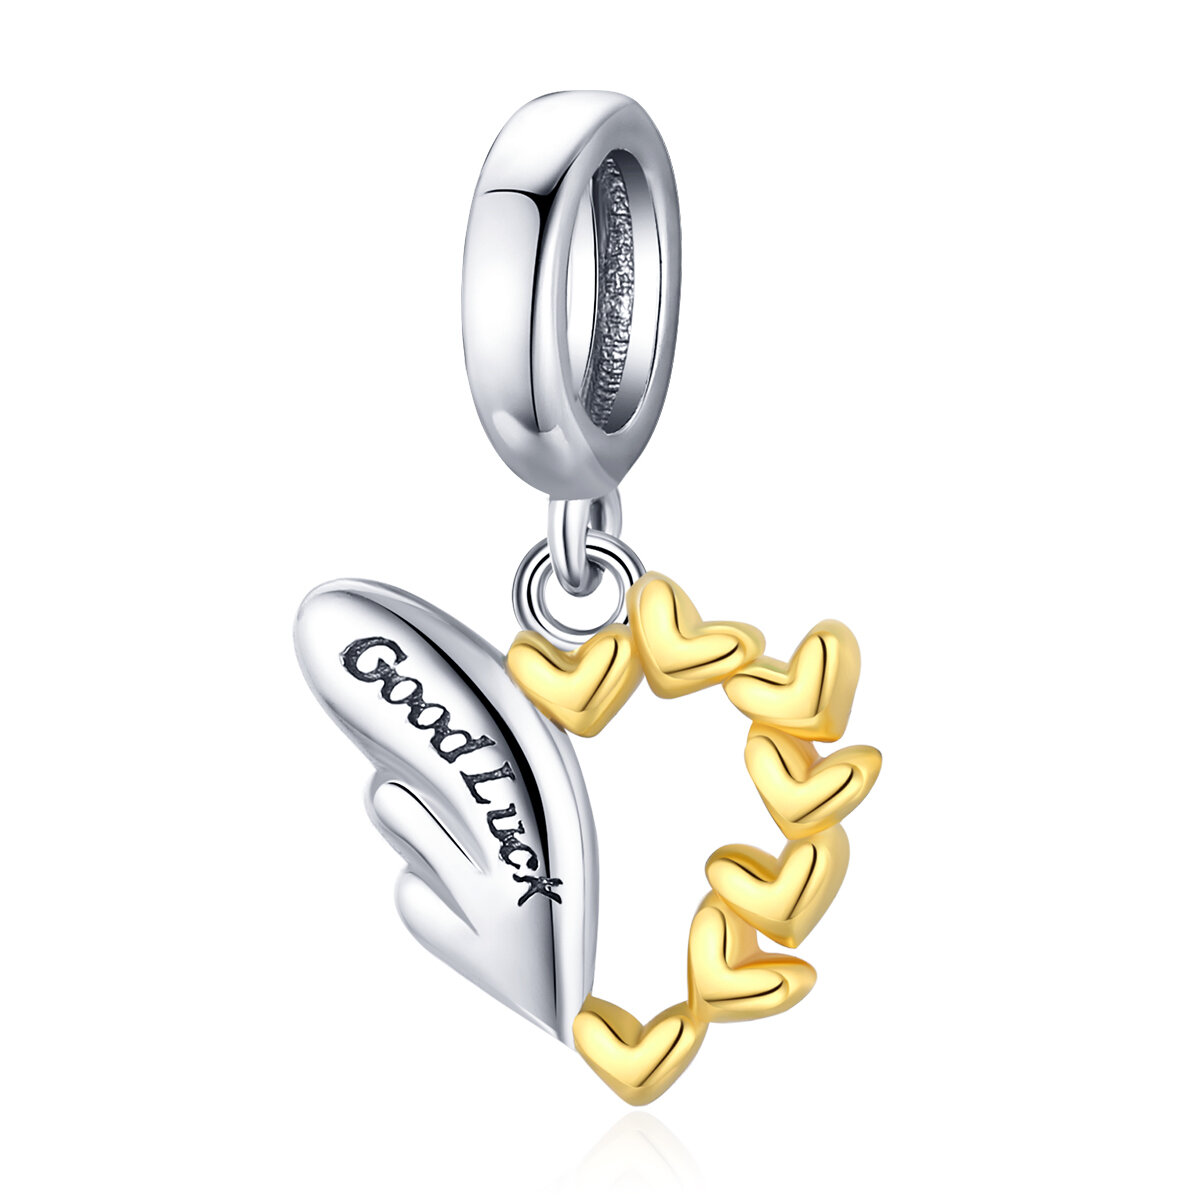 GemKing BSC504 Lucky Wing S925 Sterling Silver Charm